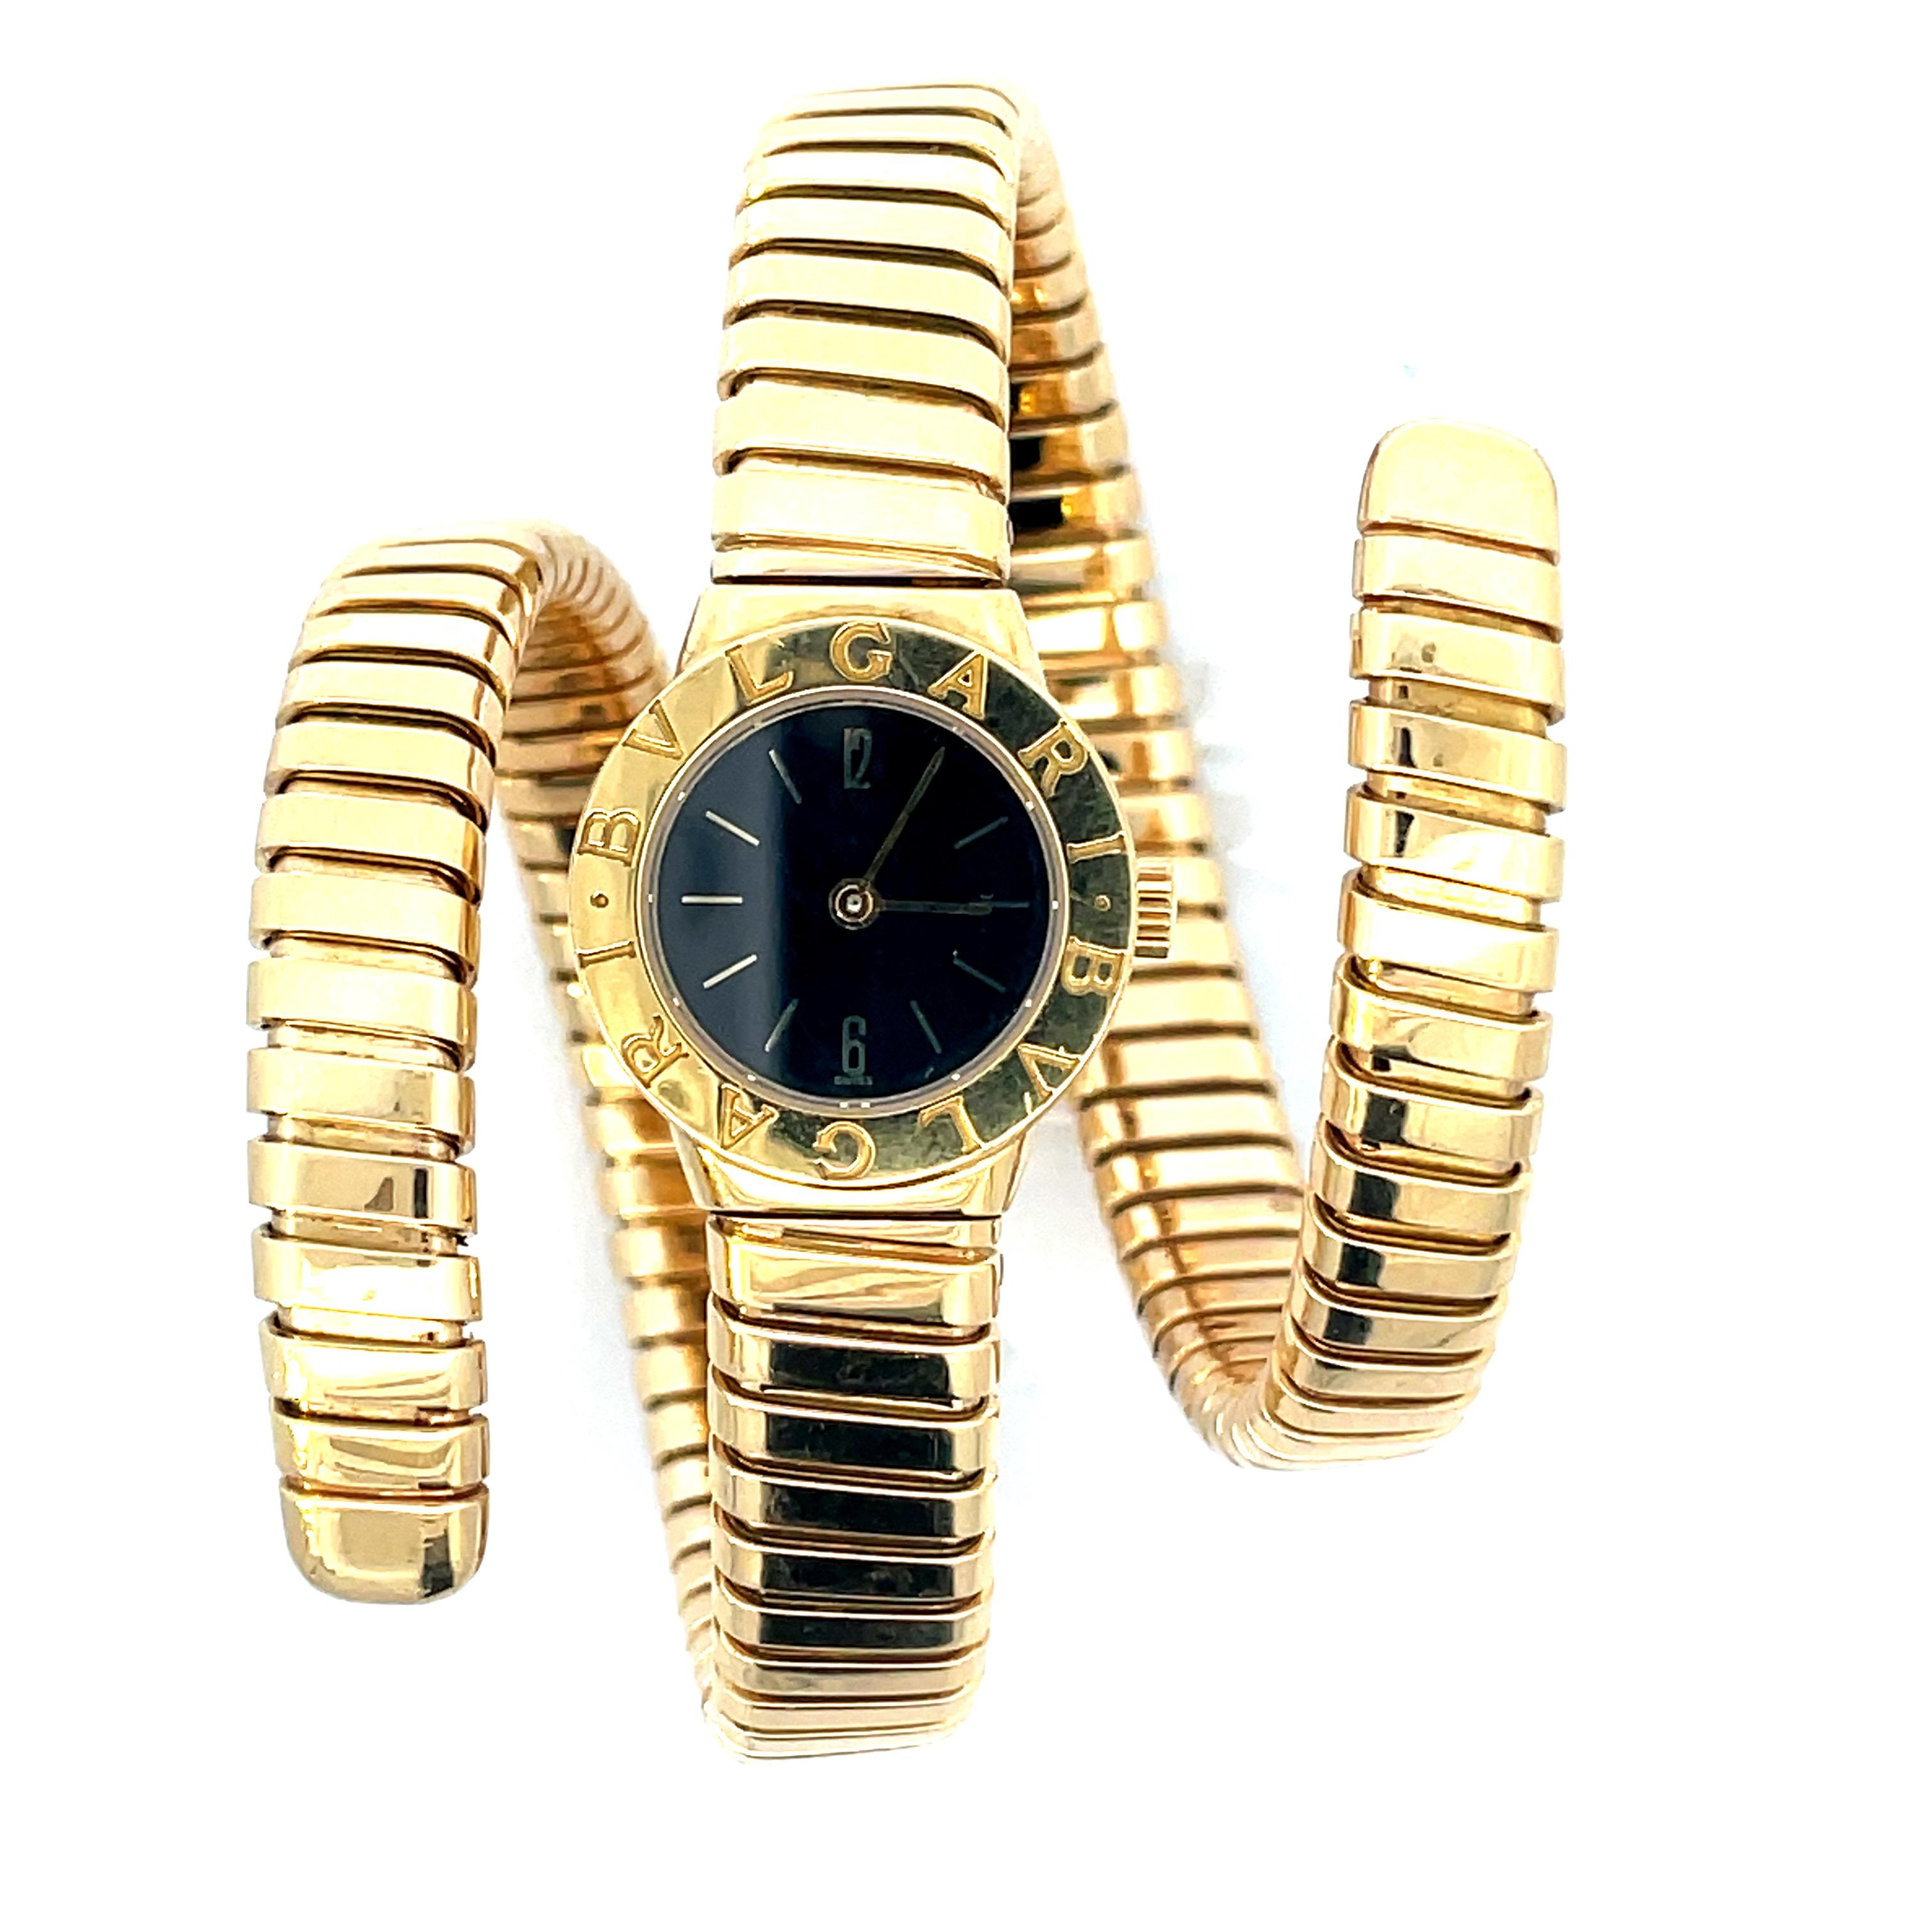 Bulgari Tubogas lady's snake bracelet watch in 18kt yellow gold featuring a stunning and rare central movement watch. This manual winding watch has a round head and black dial. An iconic watch you will wear forever. Circa mid-1980s
The watch was